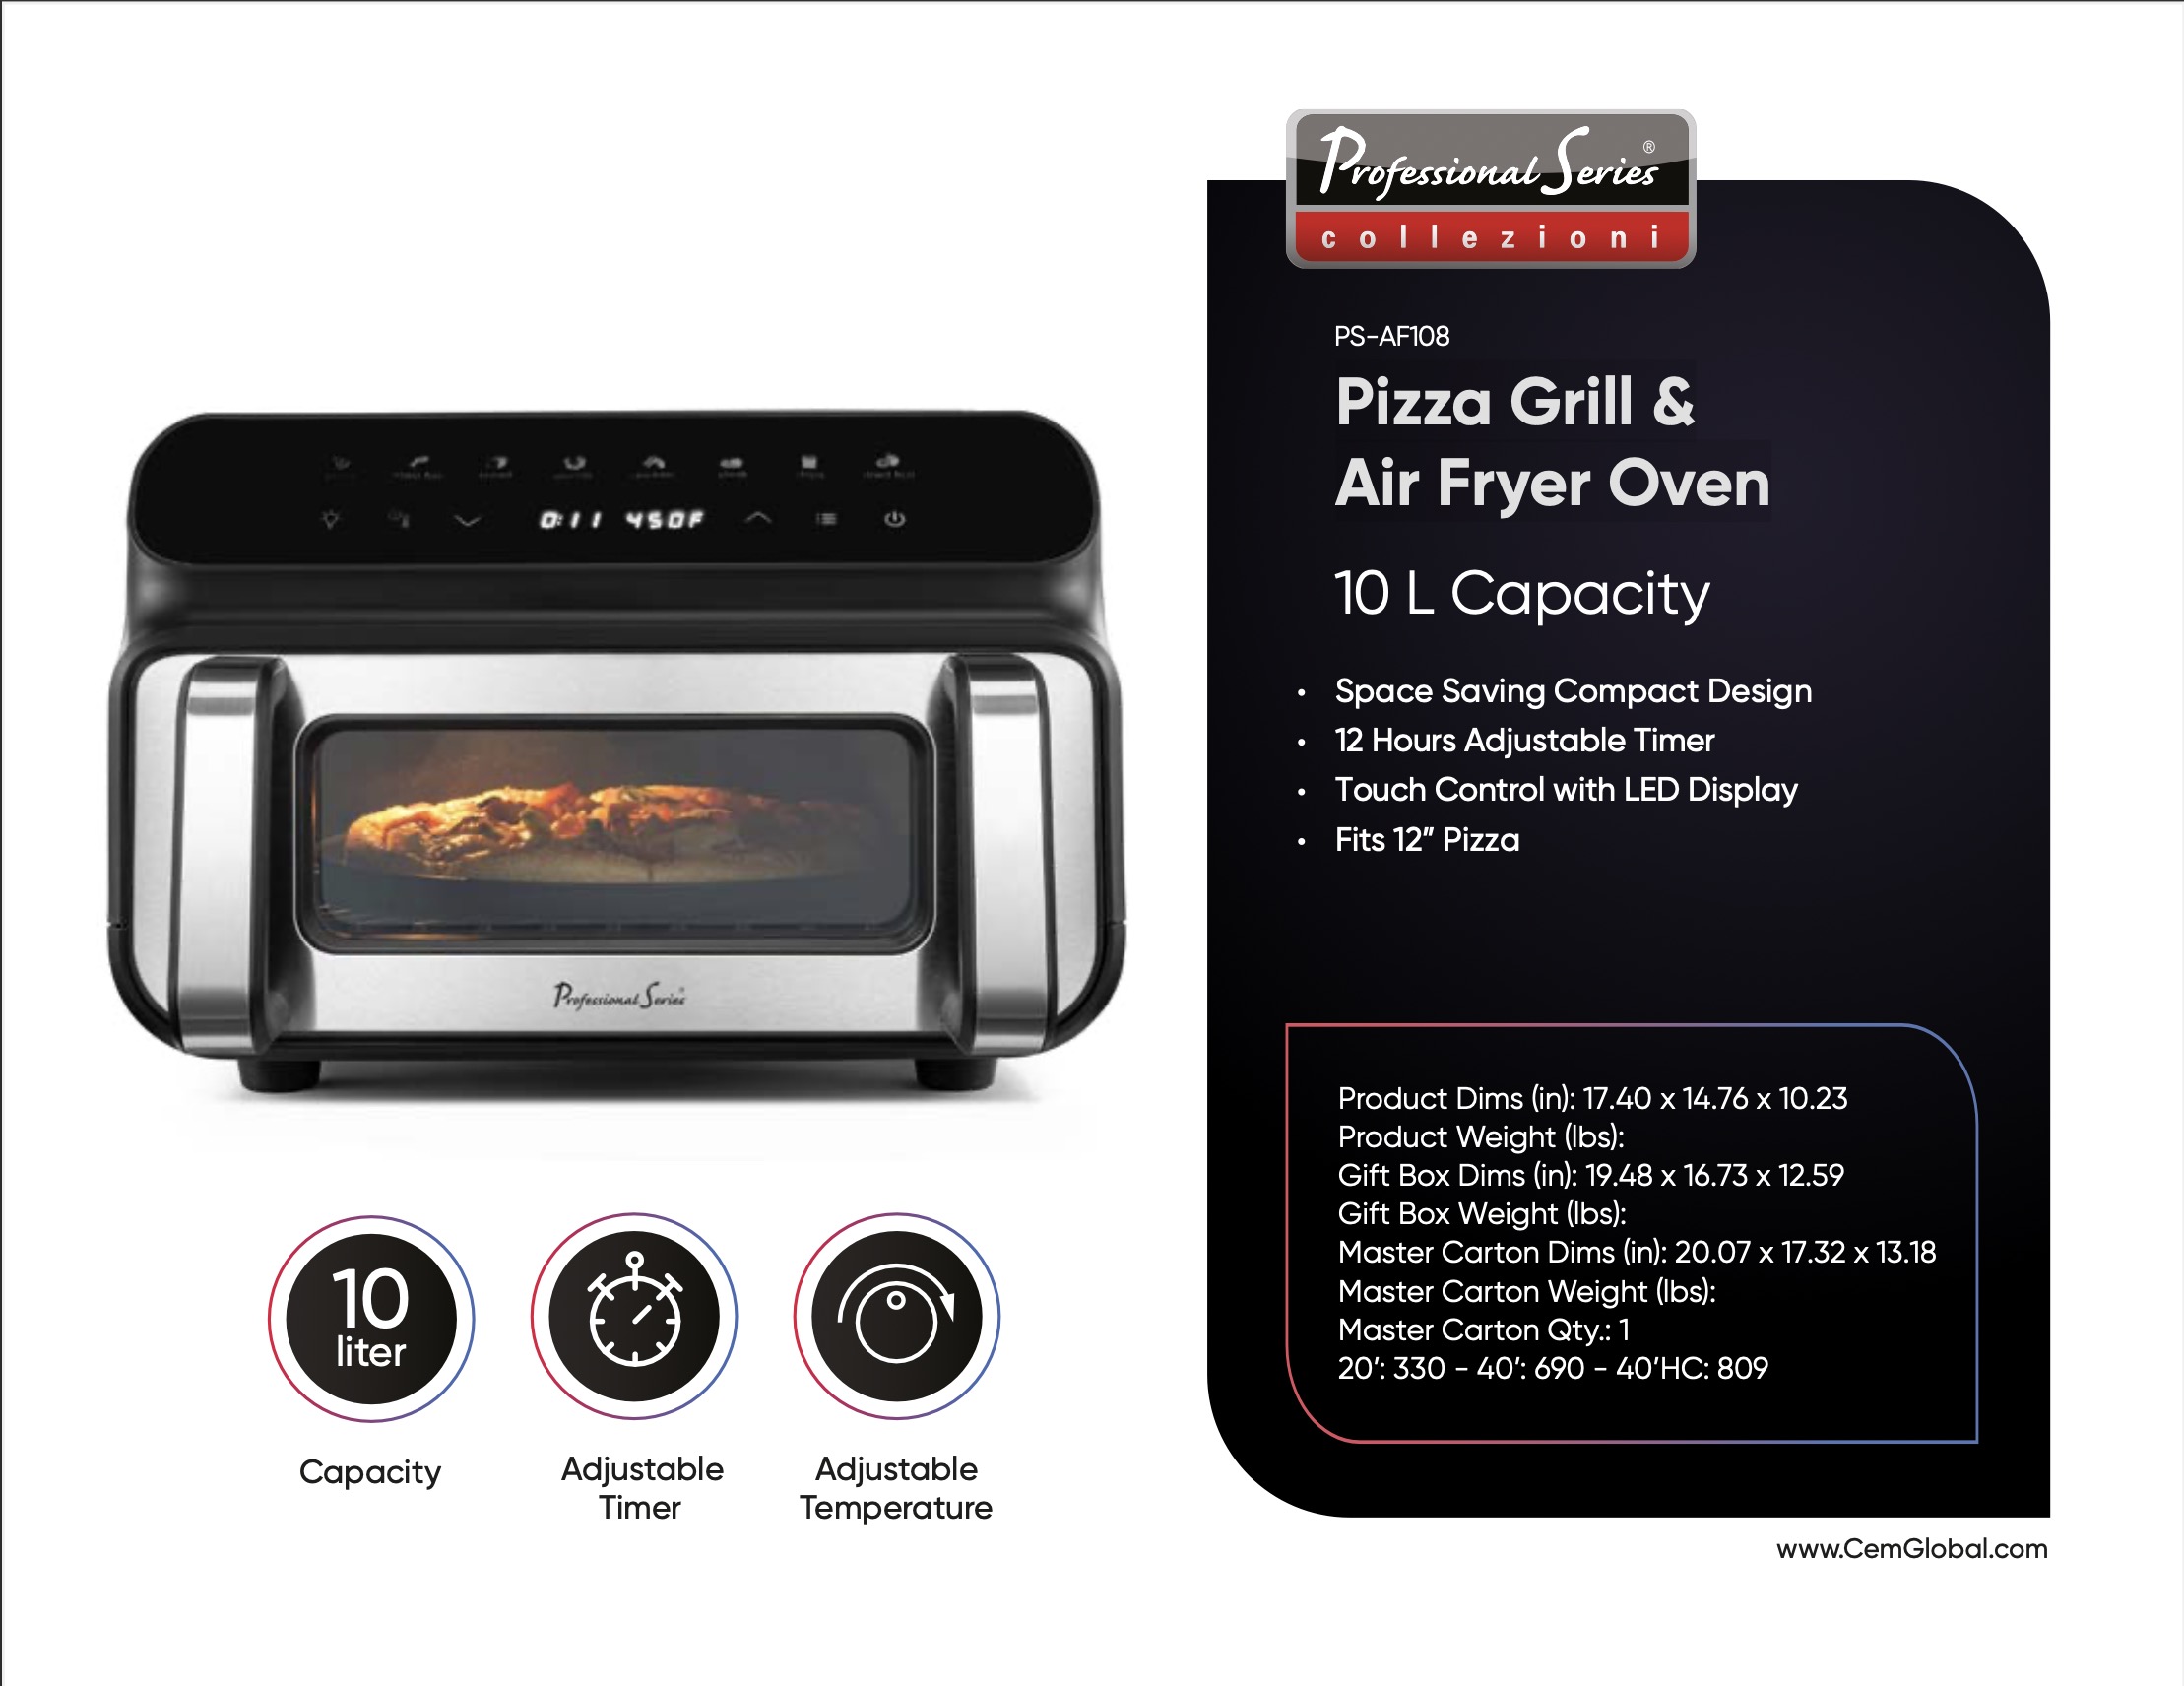 Pizza Grill & Air Fryer Oven